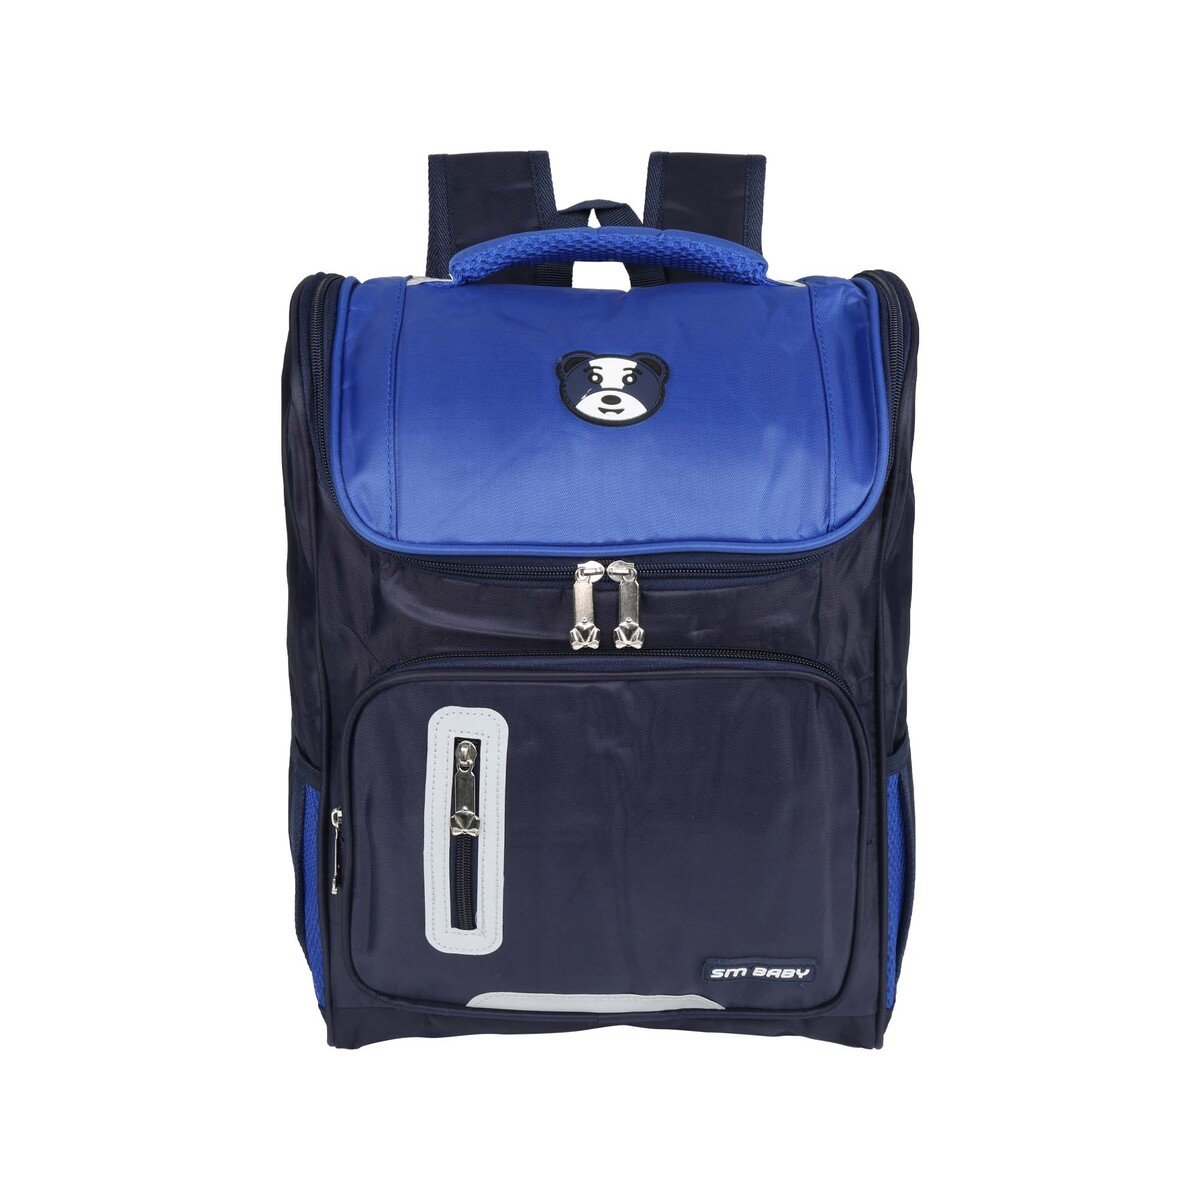 Polo Plus Backpack 9958 16 Inch Assorted